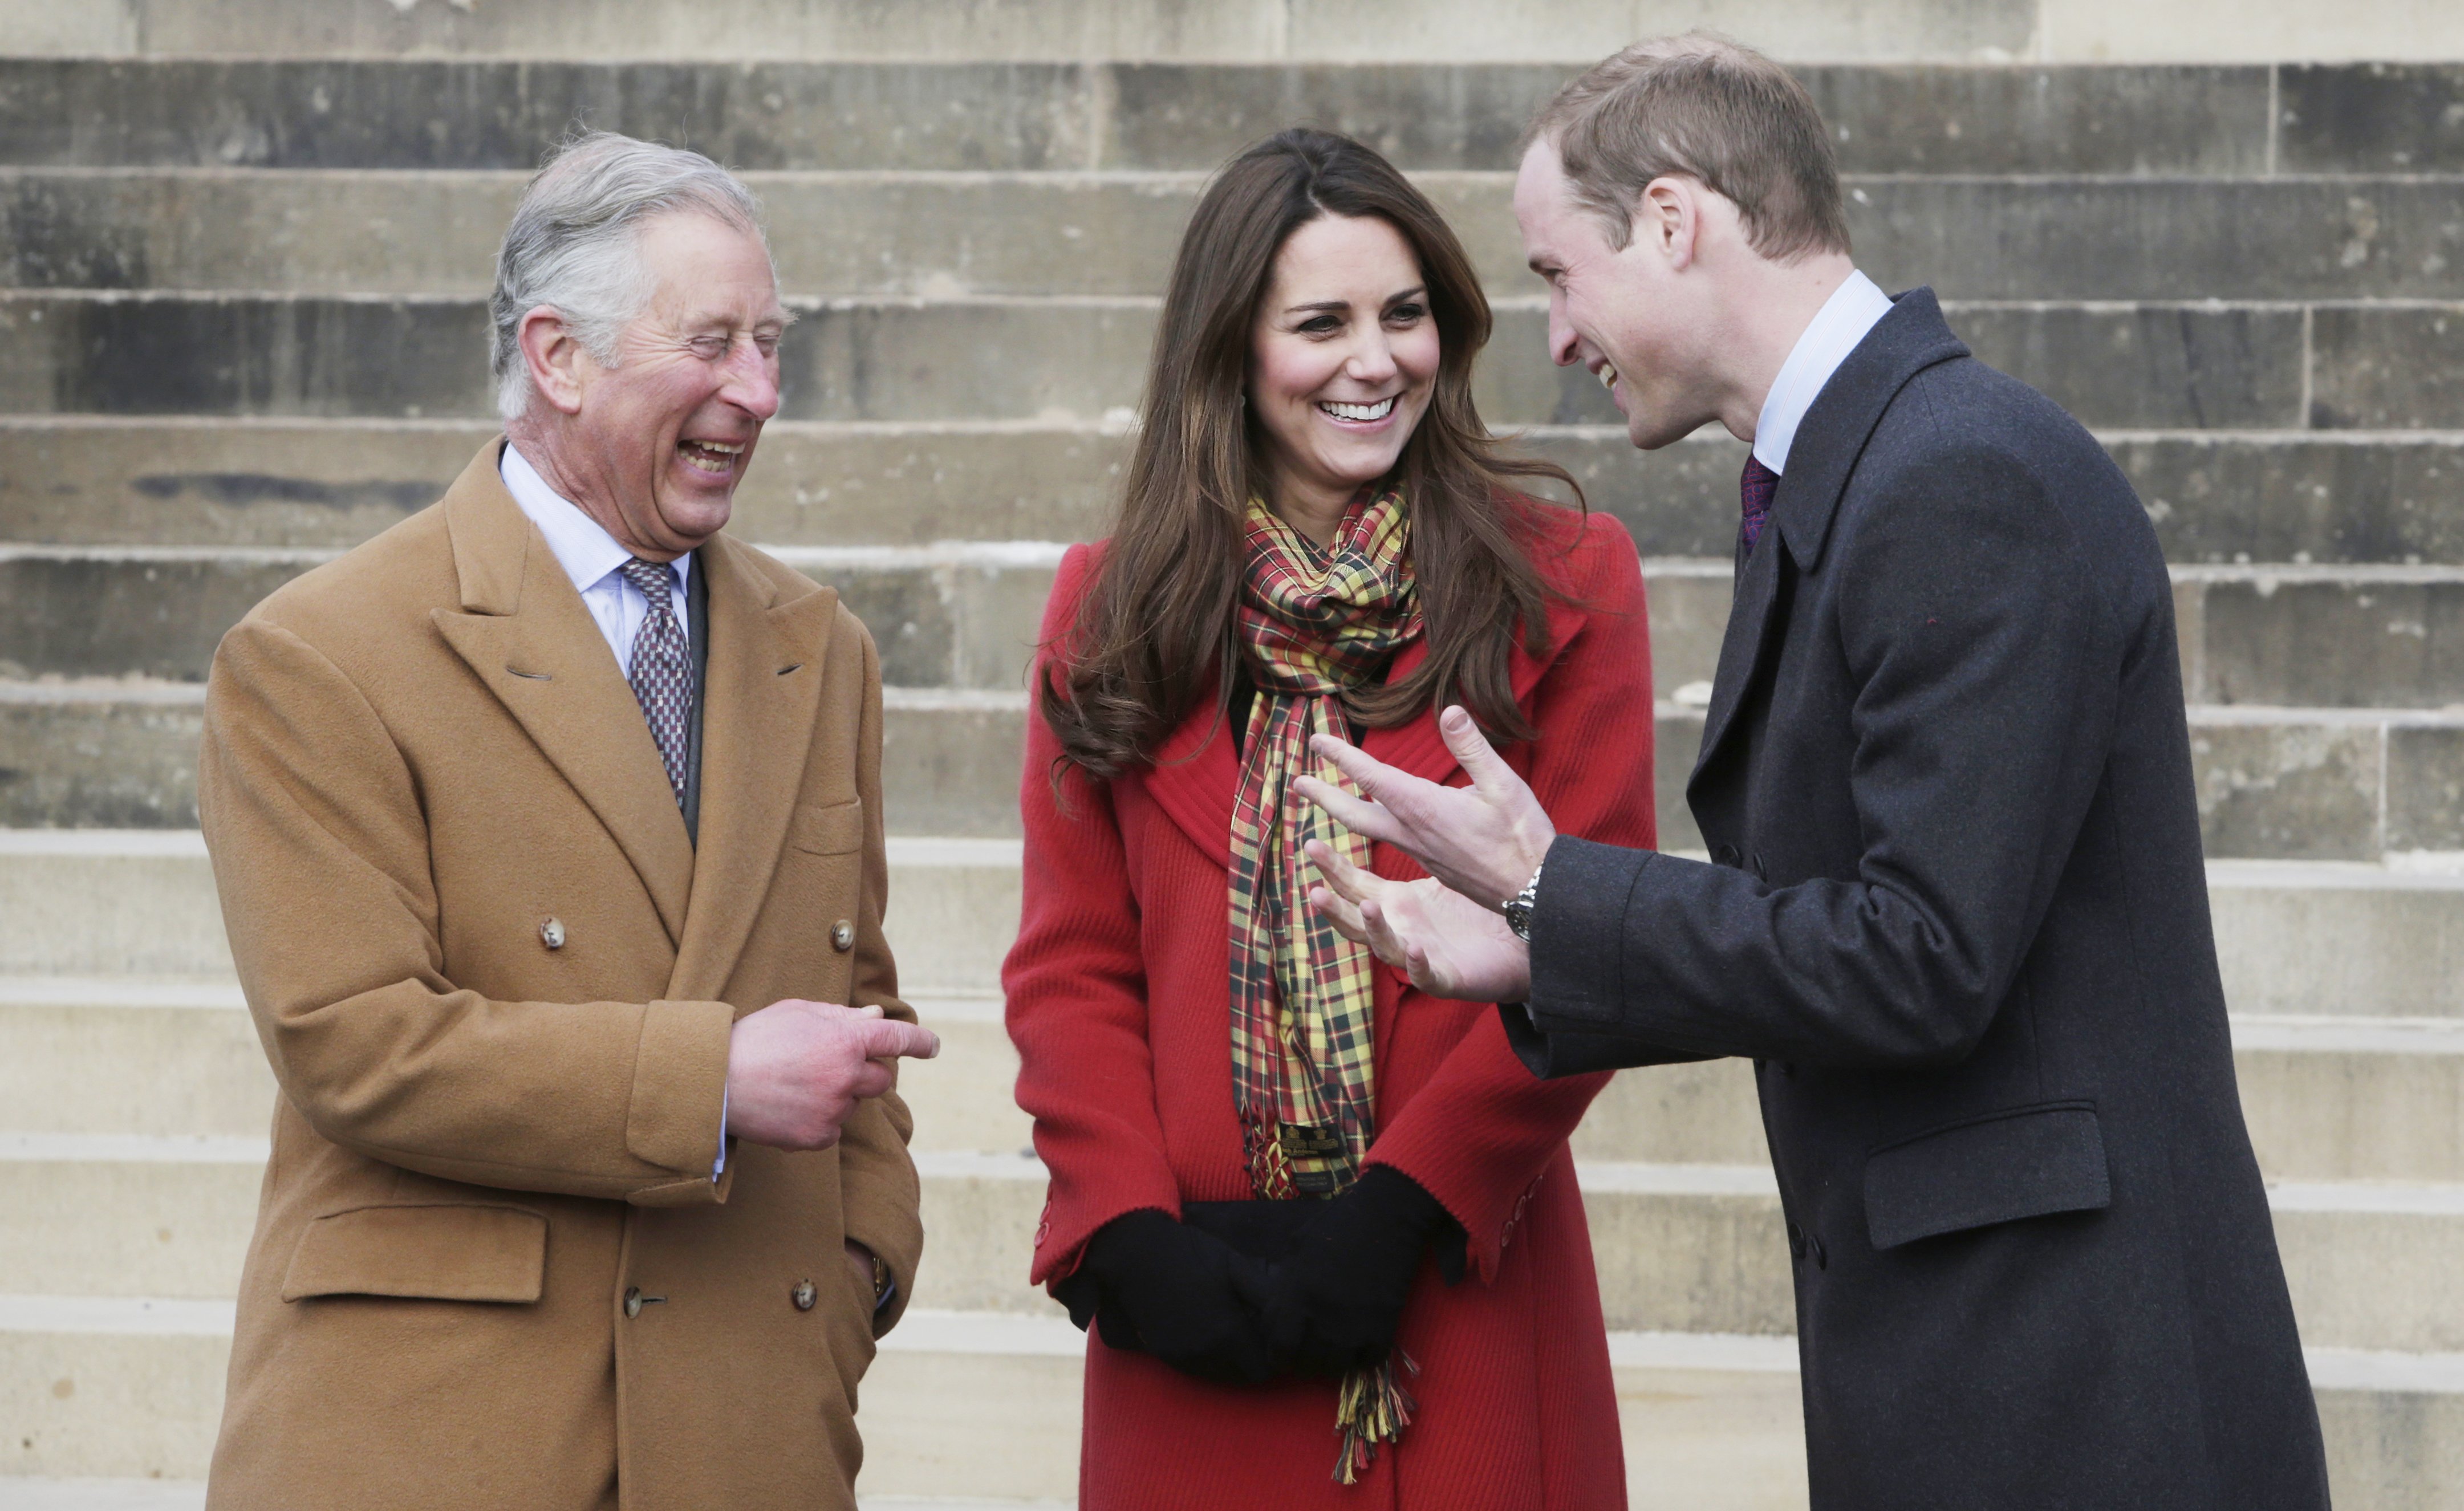 King Charles III, Prince William and Kate Middleton in Ayrshire, Scotland, 2013. |  Source: Getty Images 